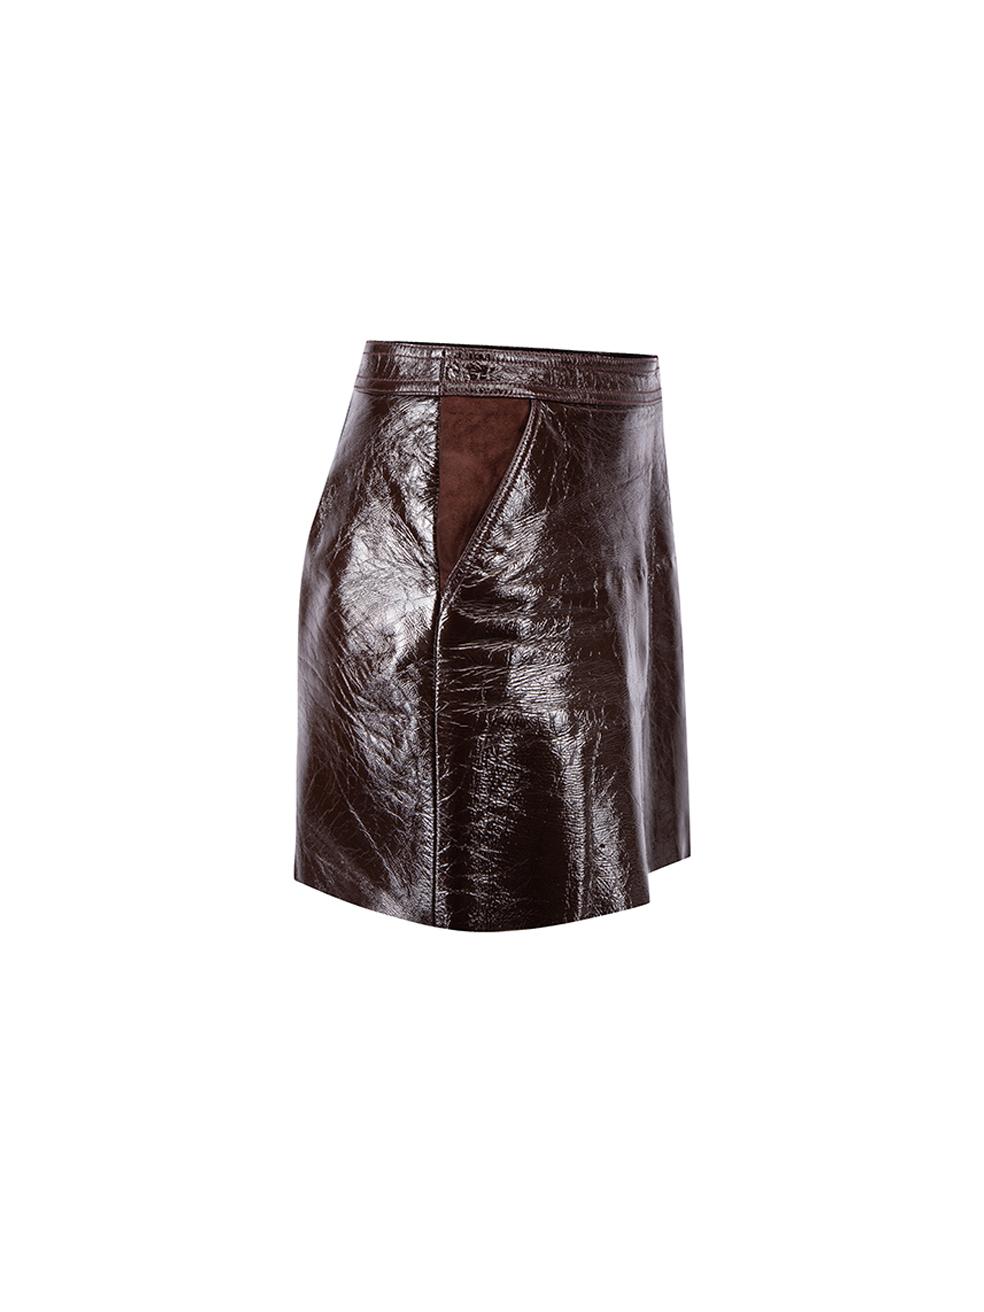 CONDITION is Very good. Minimal wear to skirt is evident. Minimal wear to the suede pockets and the outer vinly fabric on this used Theory designer resale item. Details Brown Patent leather Mini skirt Front zip closure with button Front side pockets